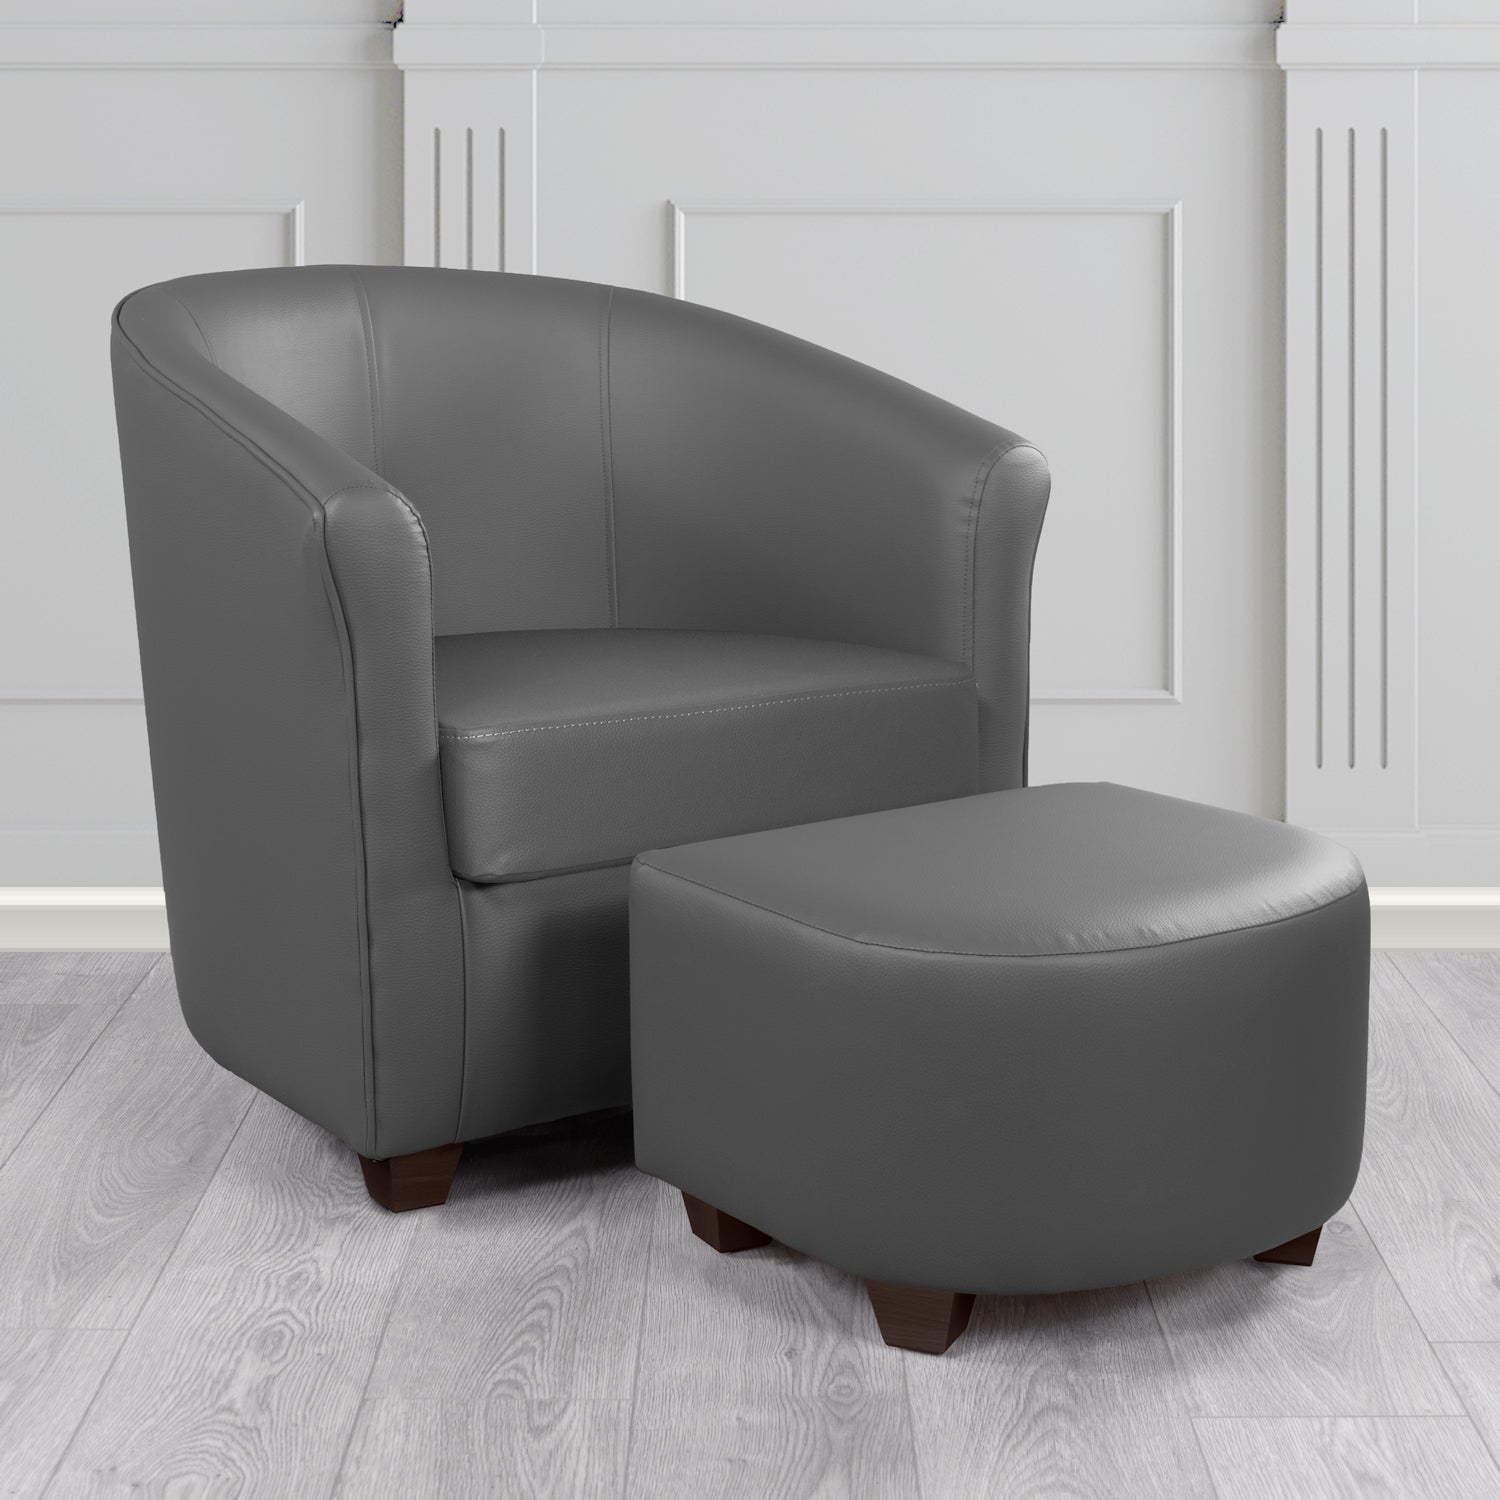 Cannes Tub Chair with Footstool Set in Just Colour Gunmetal Grey Crib 5 Faux Leather - The Tub Chair Shop